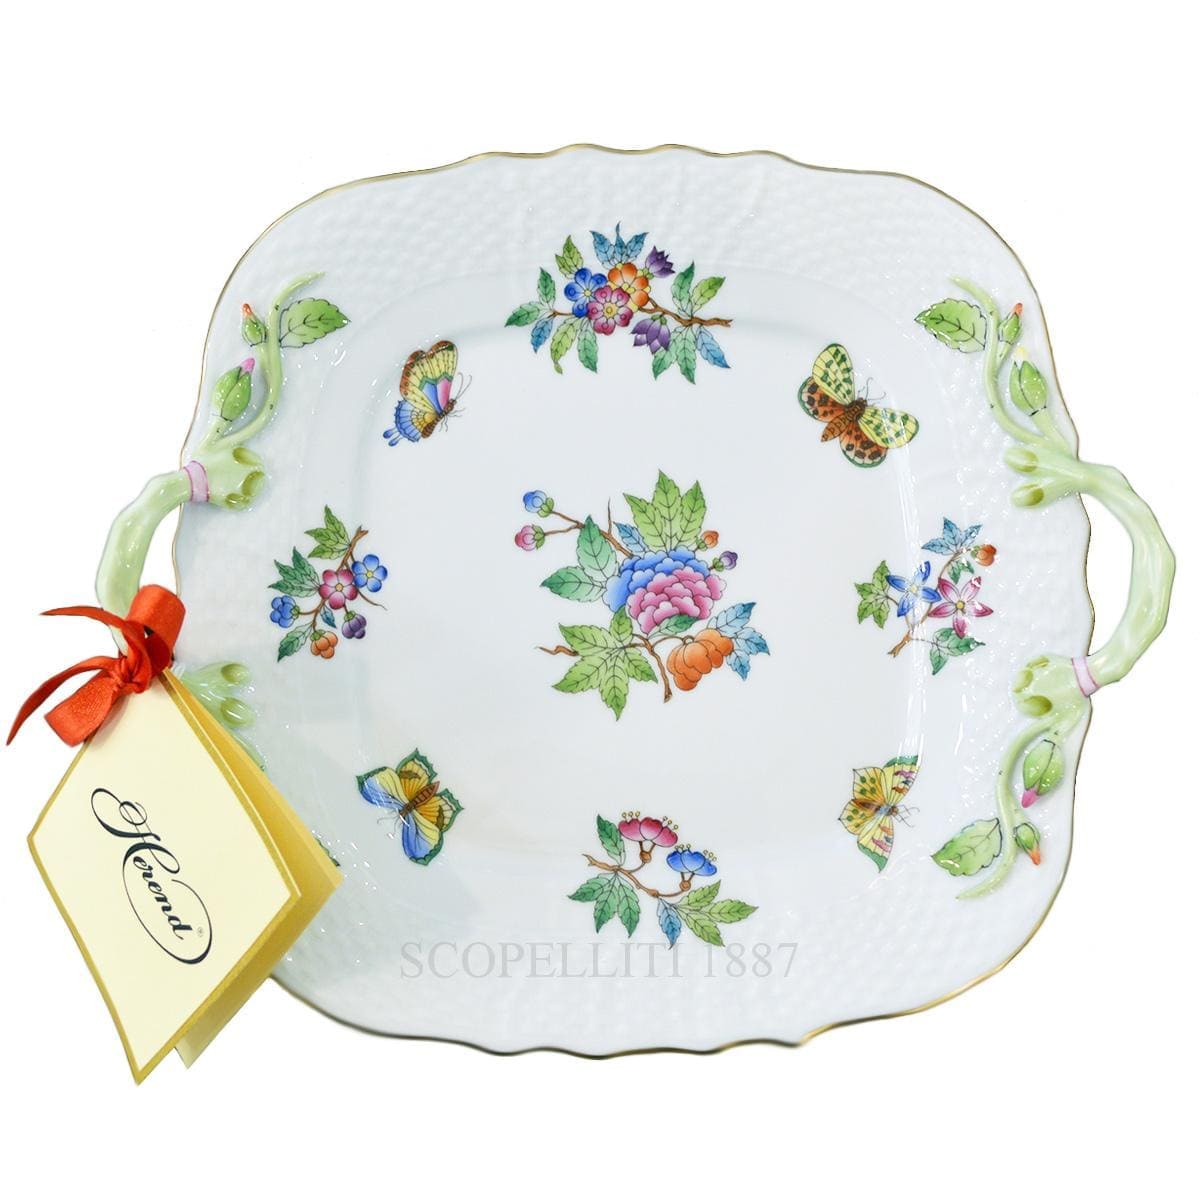 herend porcelain queen victoria square cake plate